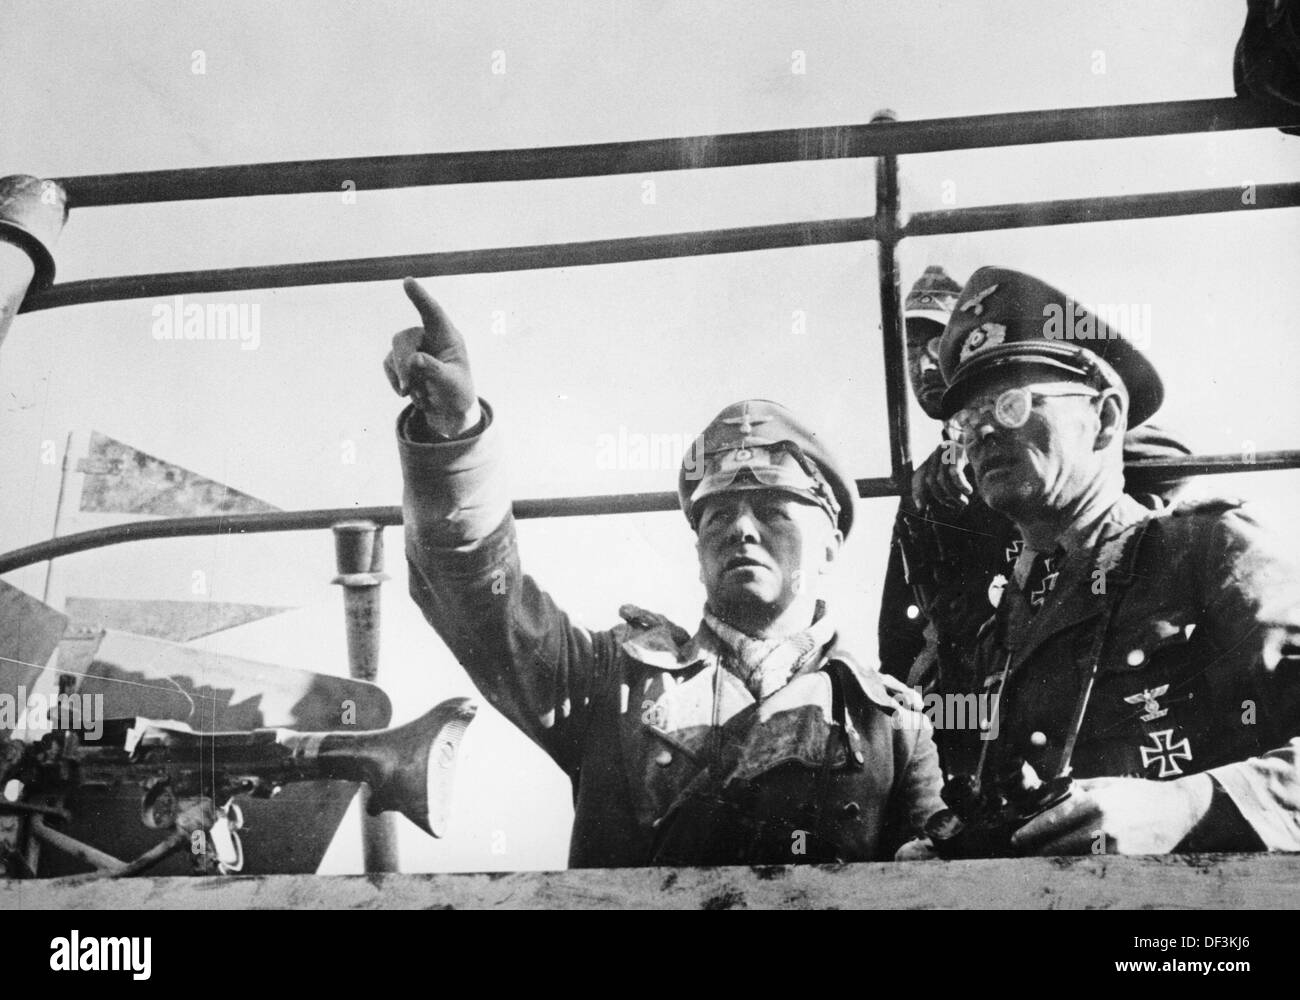 Field Marshal Erwin Rommel (l) talks to General Georg von Bismarck during the occupation of Tobruk in June 1942. The Nazi Propganda! on the back of the image is dated 26 June 1942: 'North Africa. Field Marshal Rommel plans new operations with General von Bismarck.' Fotoarchiv für Zeitgeschichte Stock Photo